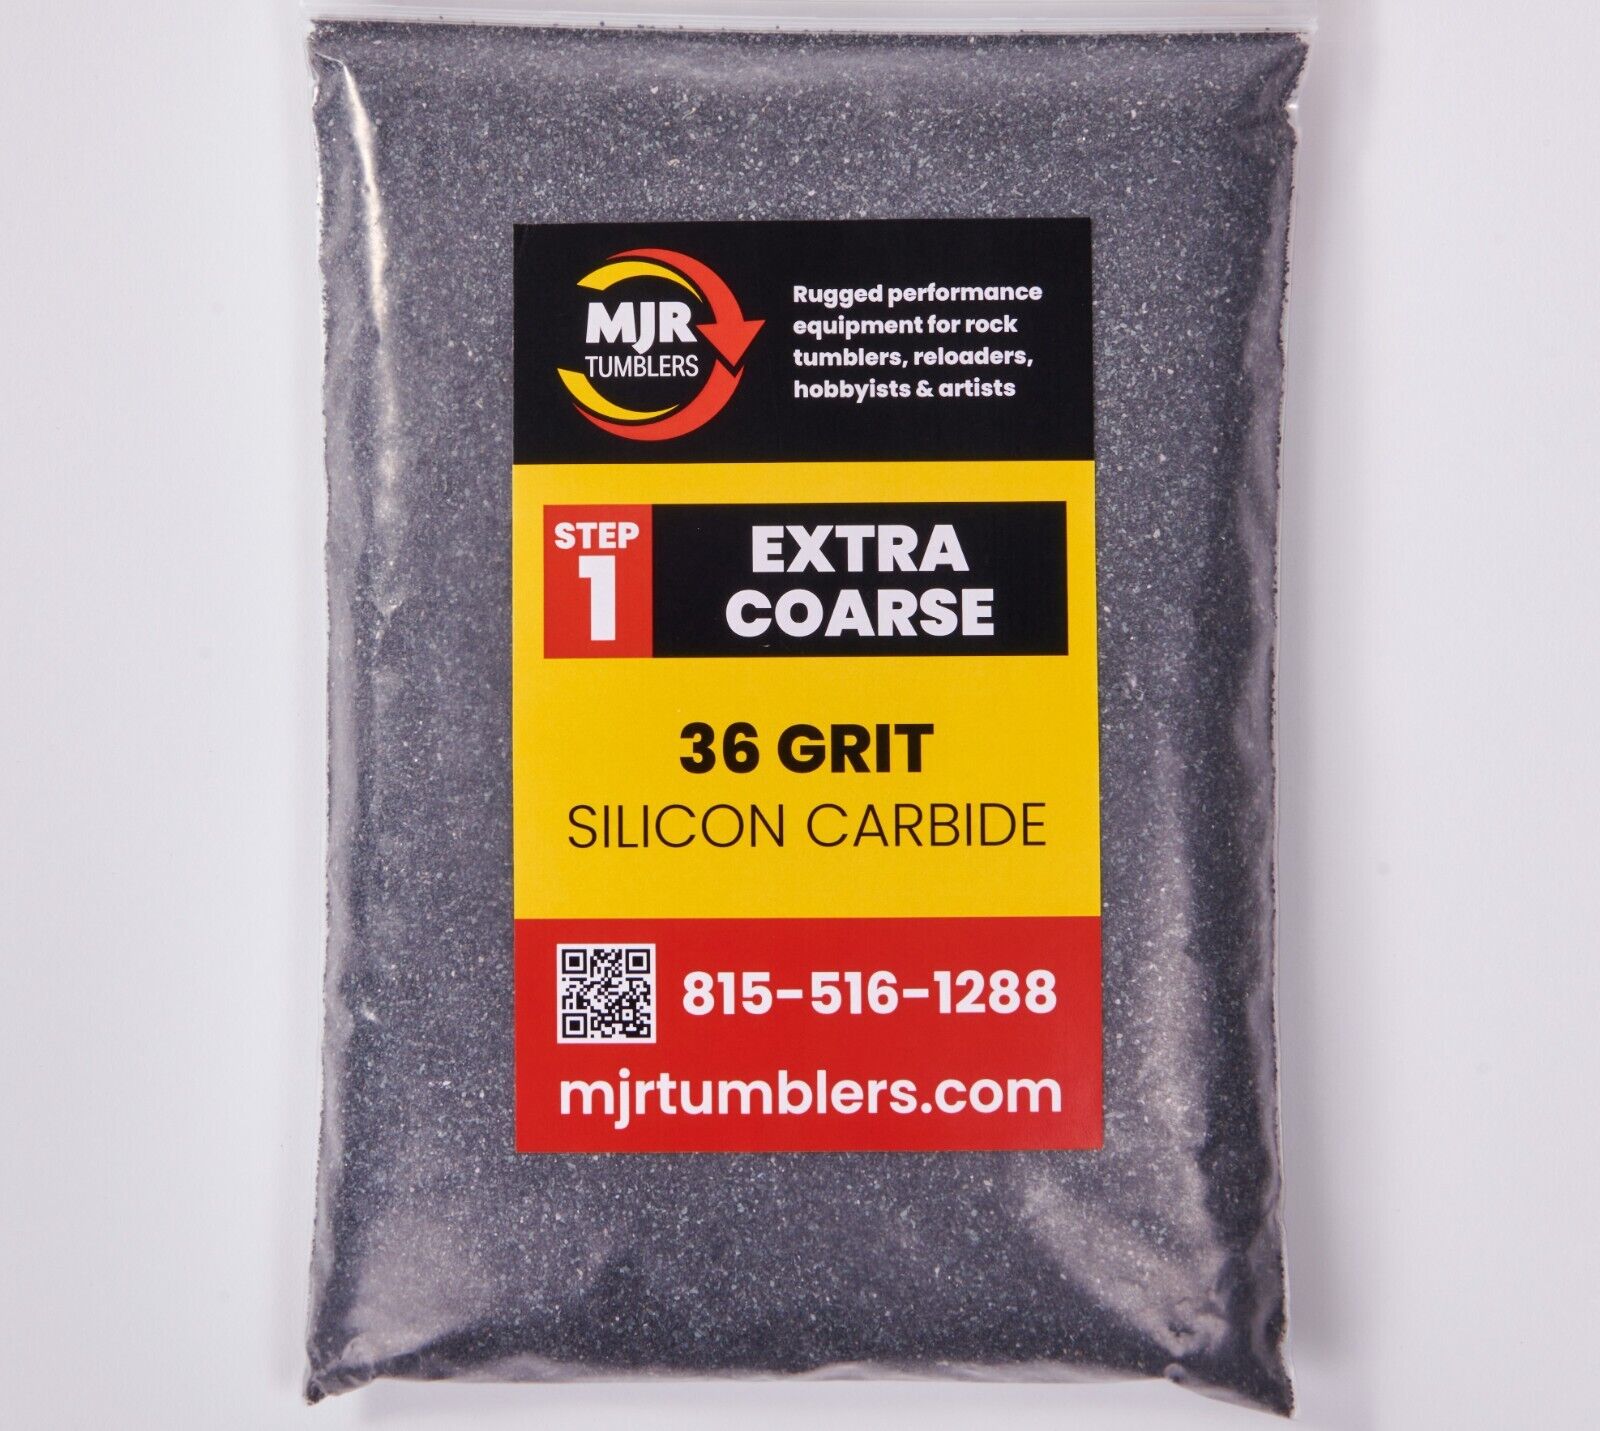 1 lb of 36 Grit Extra Coarse Rock Tumbling Silicon Carbide for Lapidary use